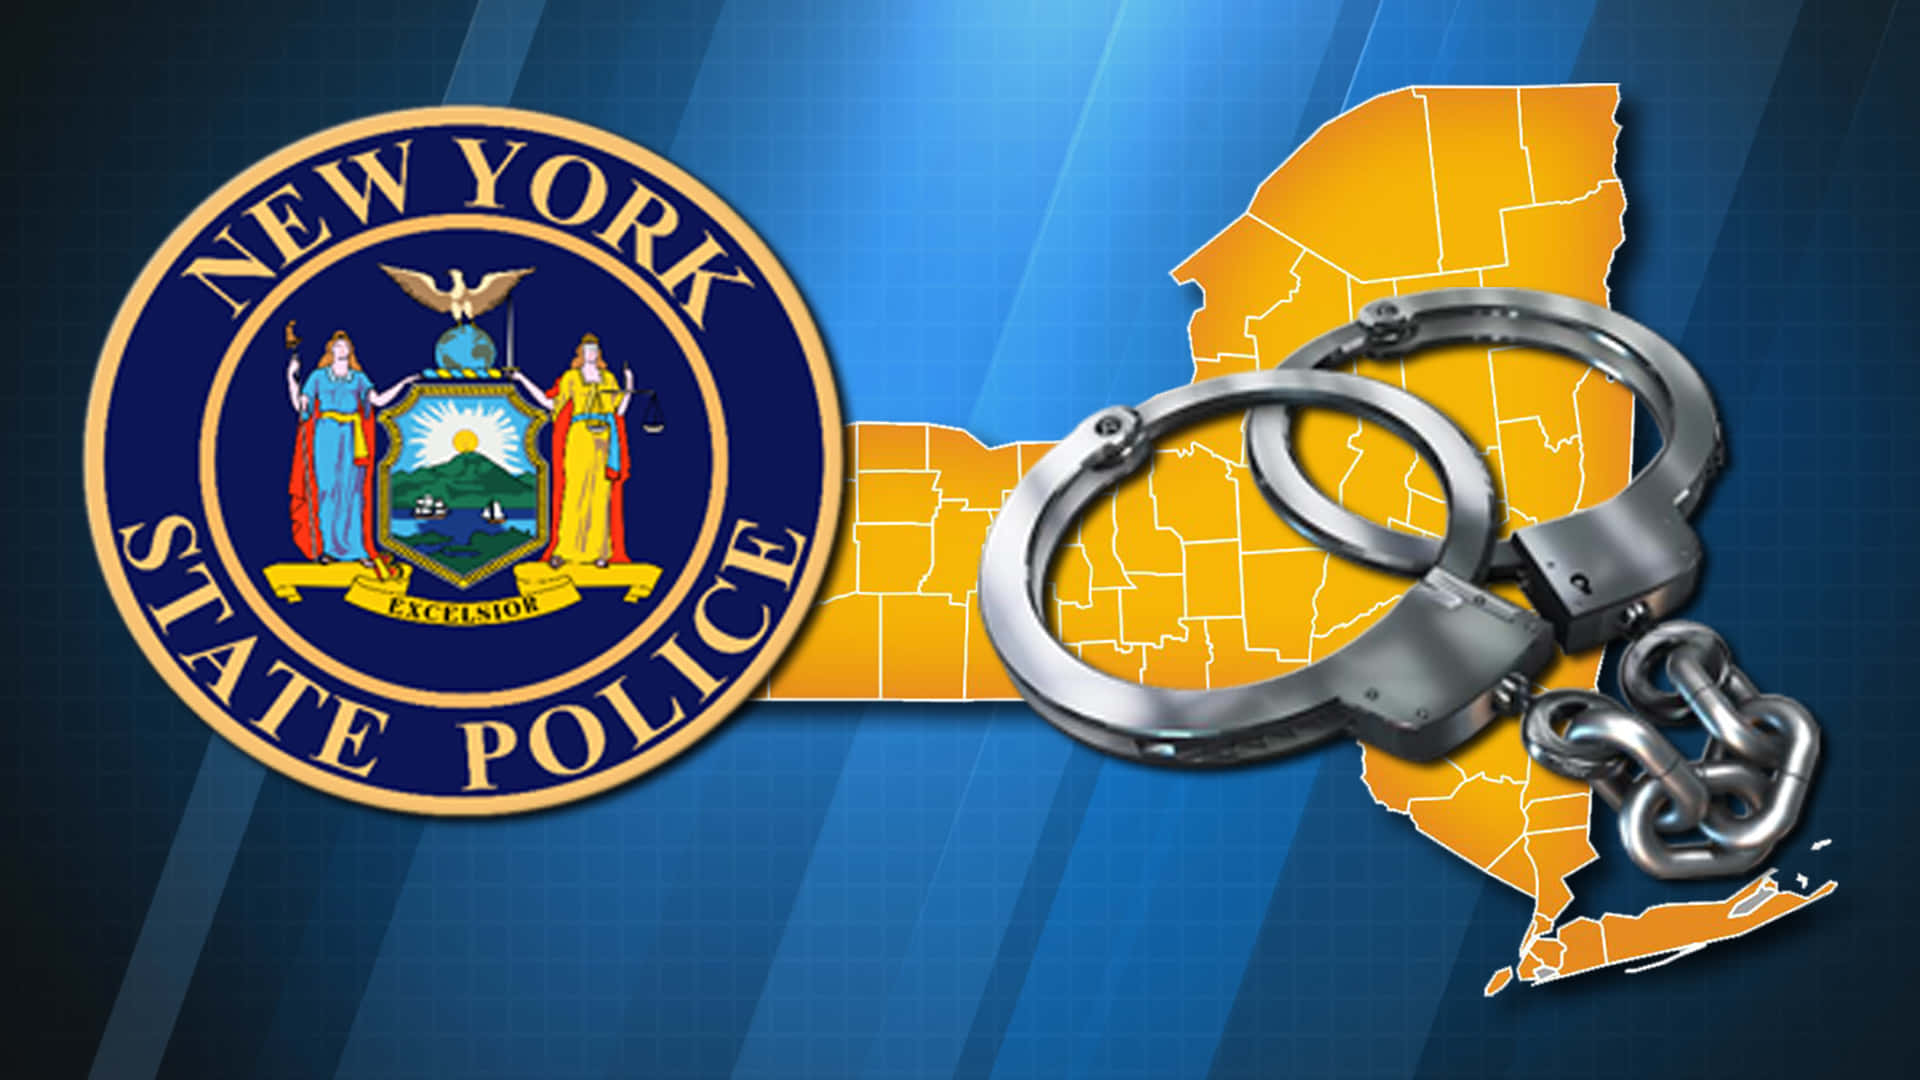 New York State Police Badgeand Handcuffs Wallpaper